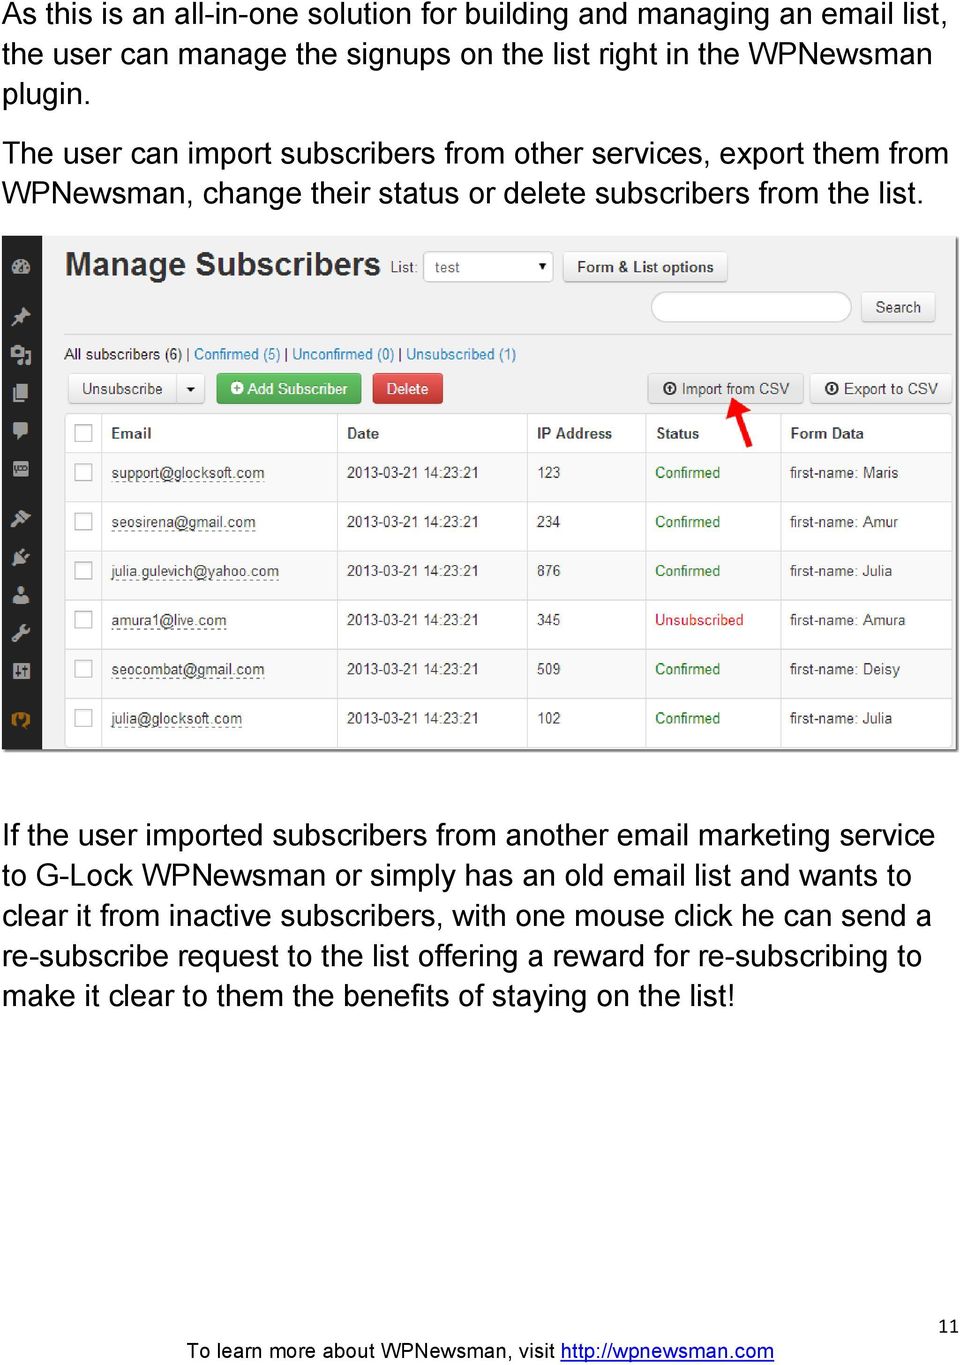 If the user imported subscribers from another email marketing service to G-Lock WPNewsman or simply has an old email list and wants to clear it from